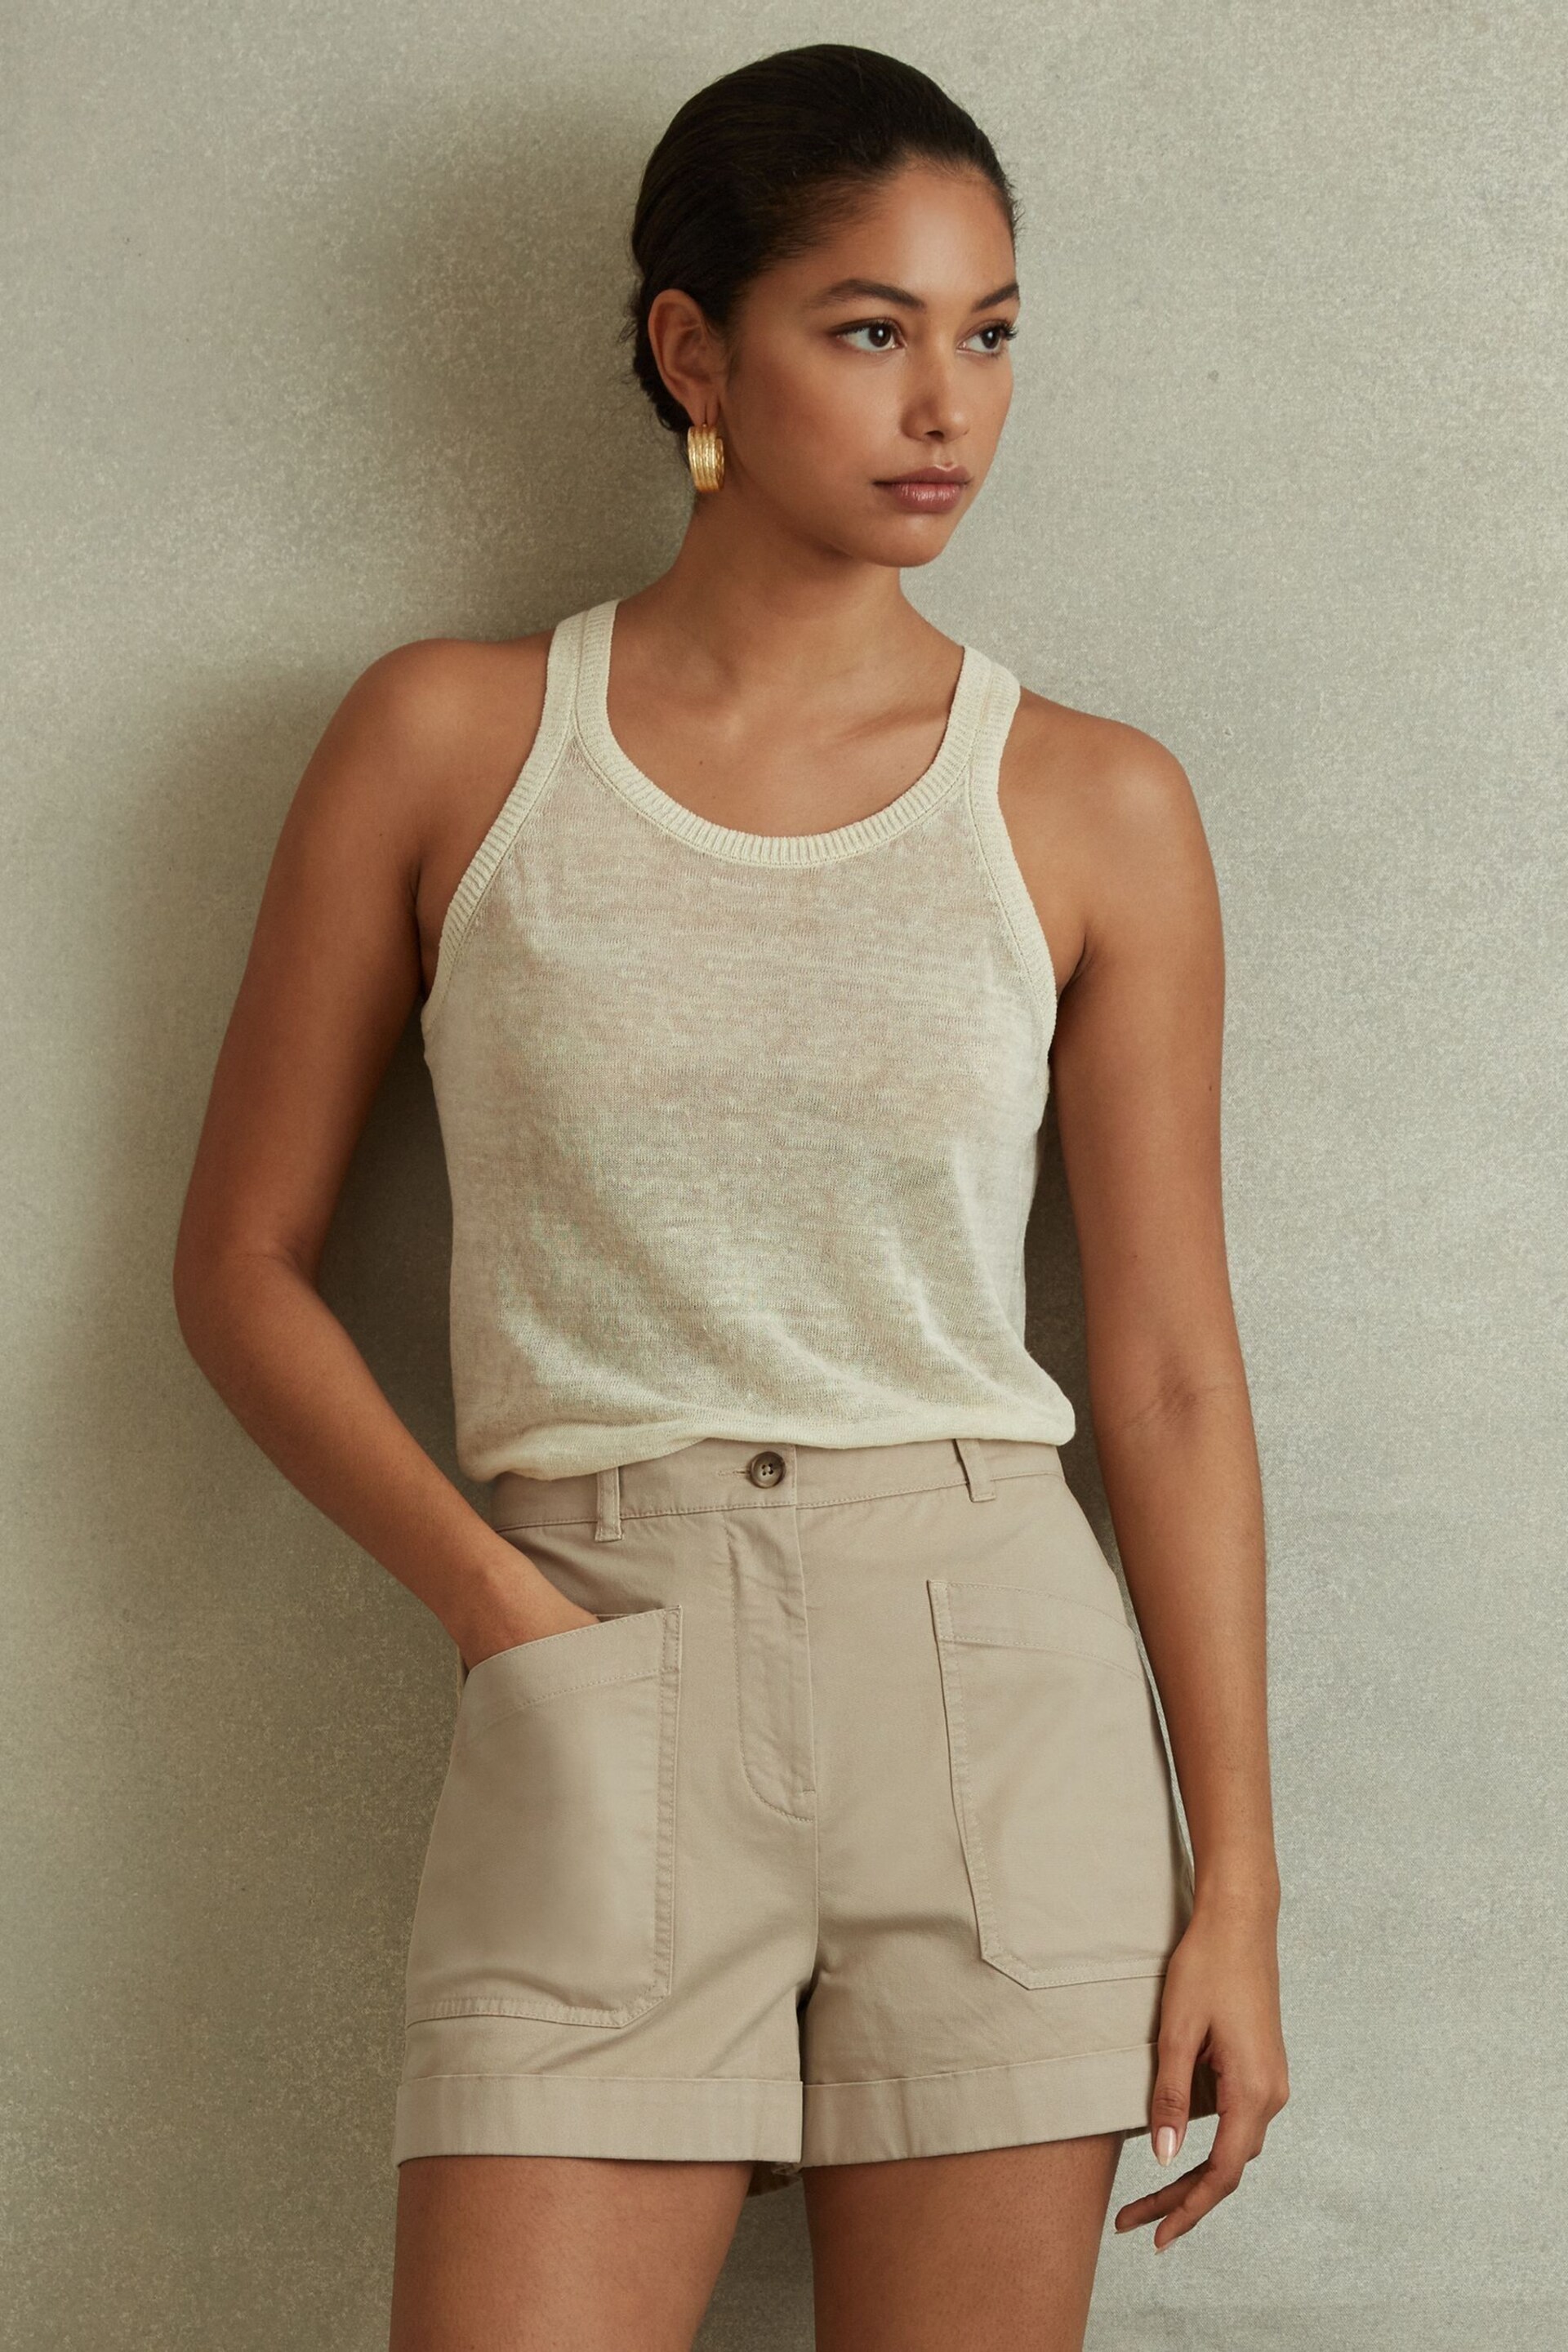 Reiss Neutral Nova Cotton Blend Shorts with Turned-Up Hems - Image 1 of 5